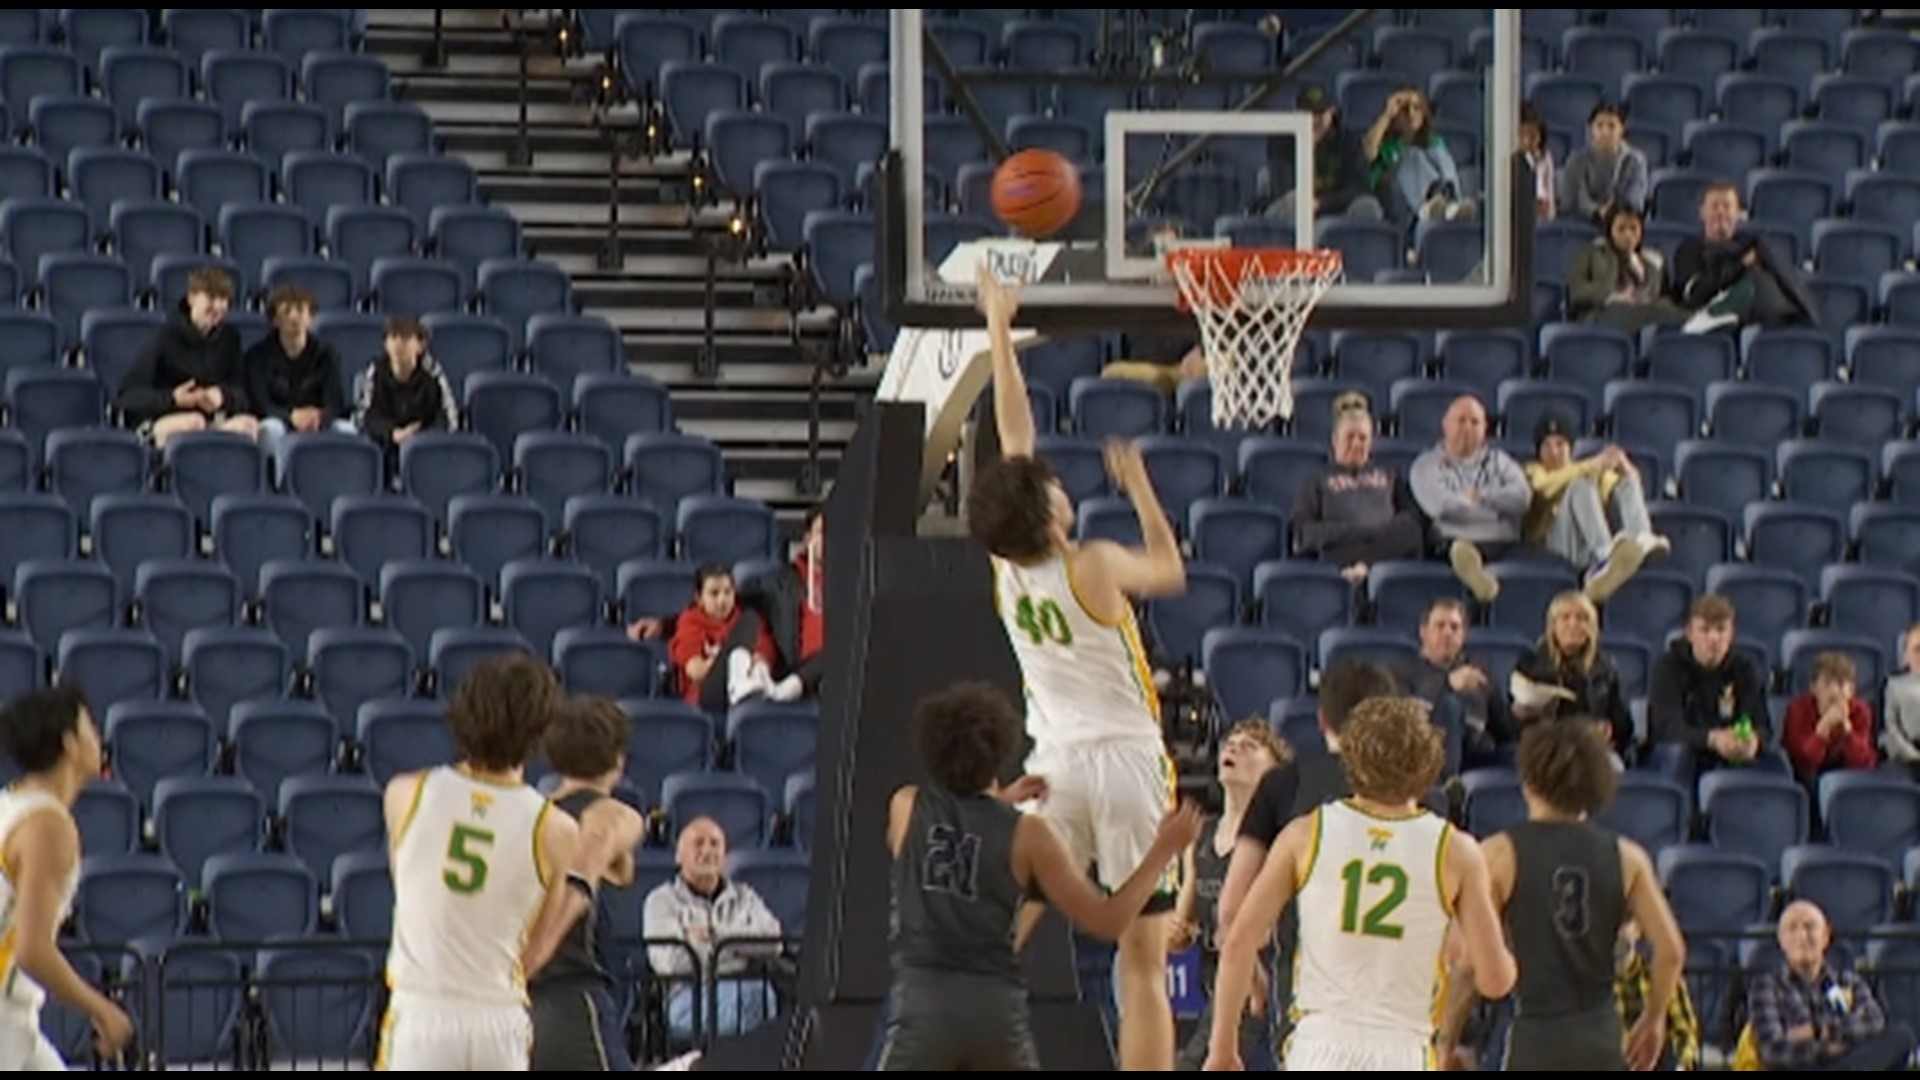 Highlights of the Richland boys 70-59 win over Glacier Peak in the 4A State Semifinals